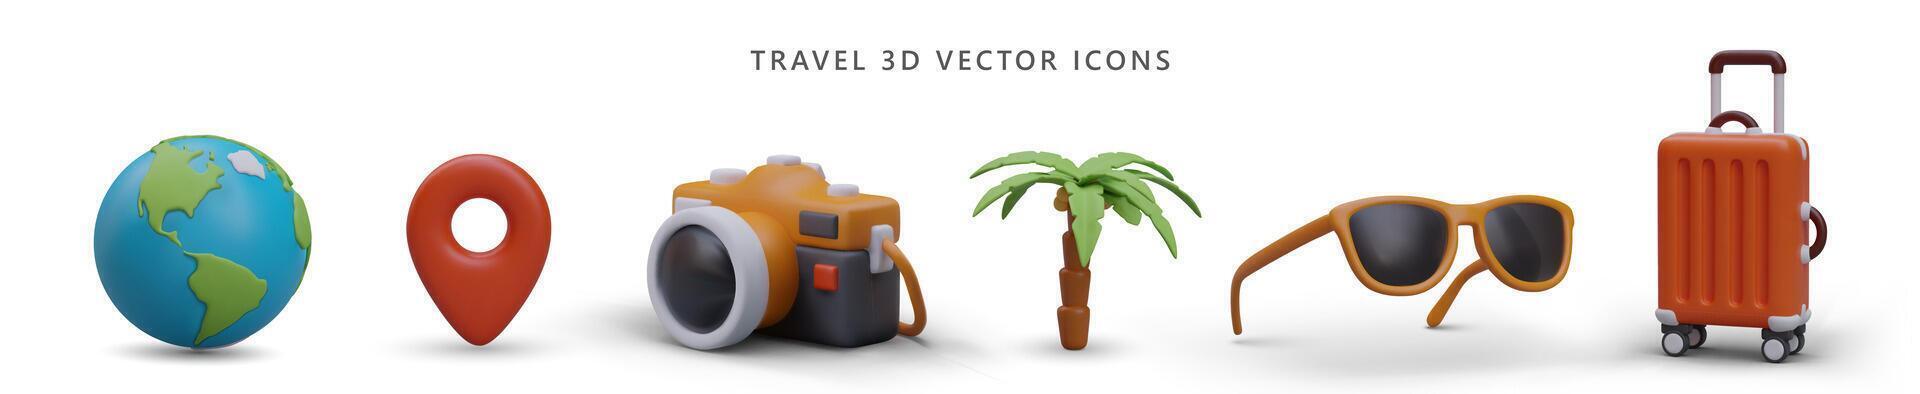 Travel 3D icons set with shadows. Collection of signs on theme of travel vector